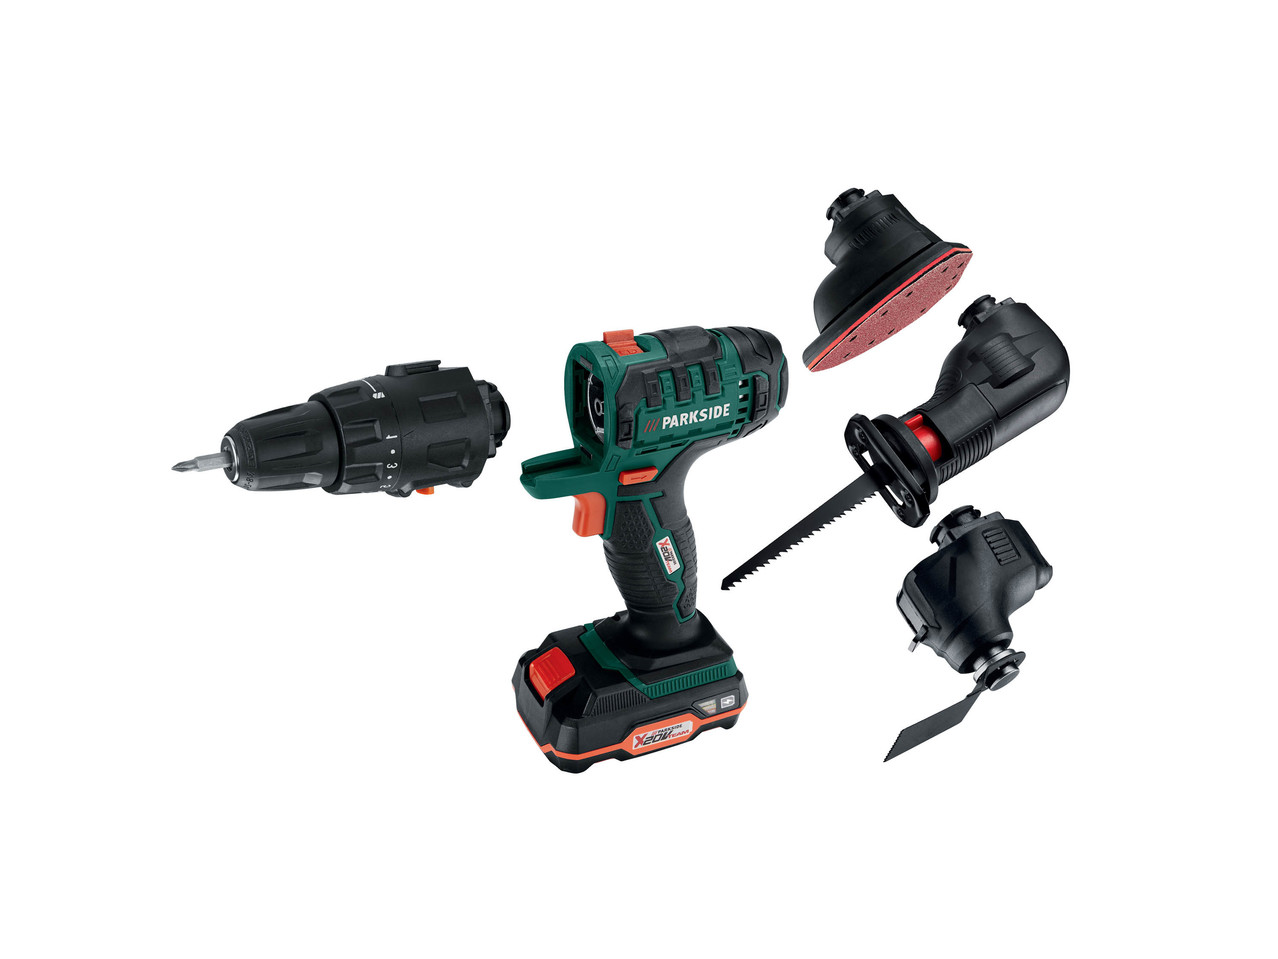 PARKSIDE 20V Li-Ion 4-in-1 Cordless Combination Tool